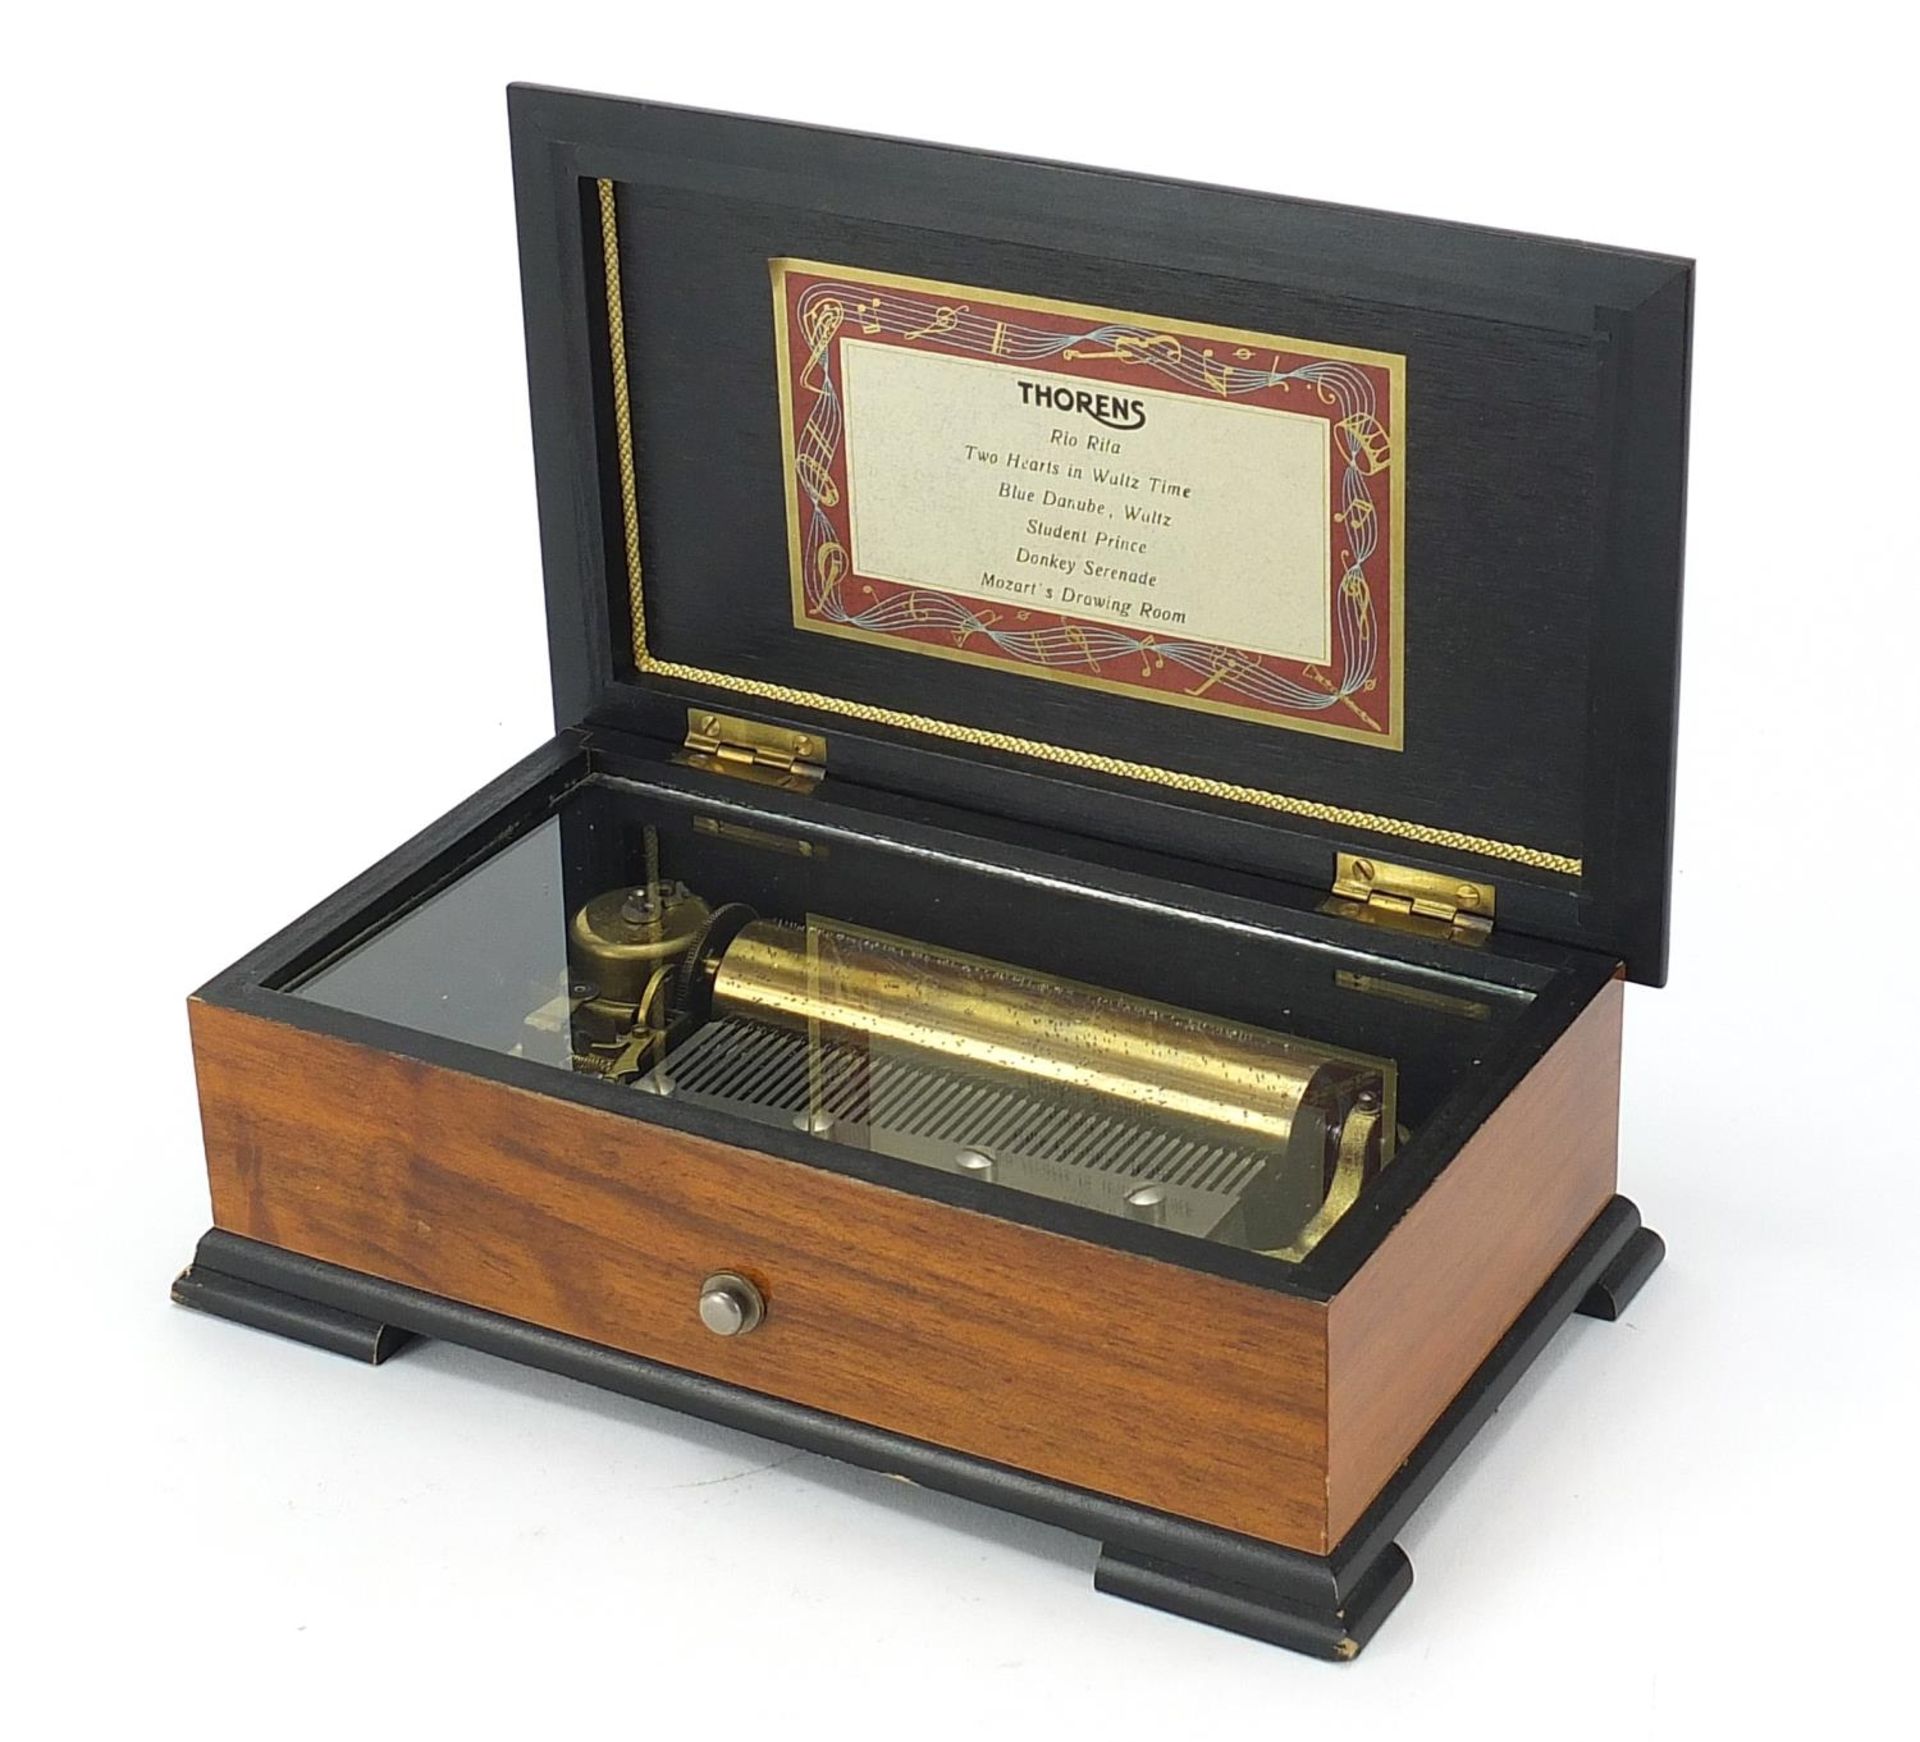 Thorens Swiss music box housed in an inlaid wooden case, 8cm H x 22.5cm W x 13cm D